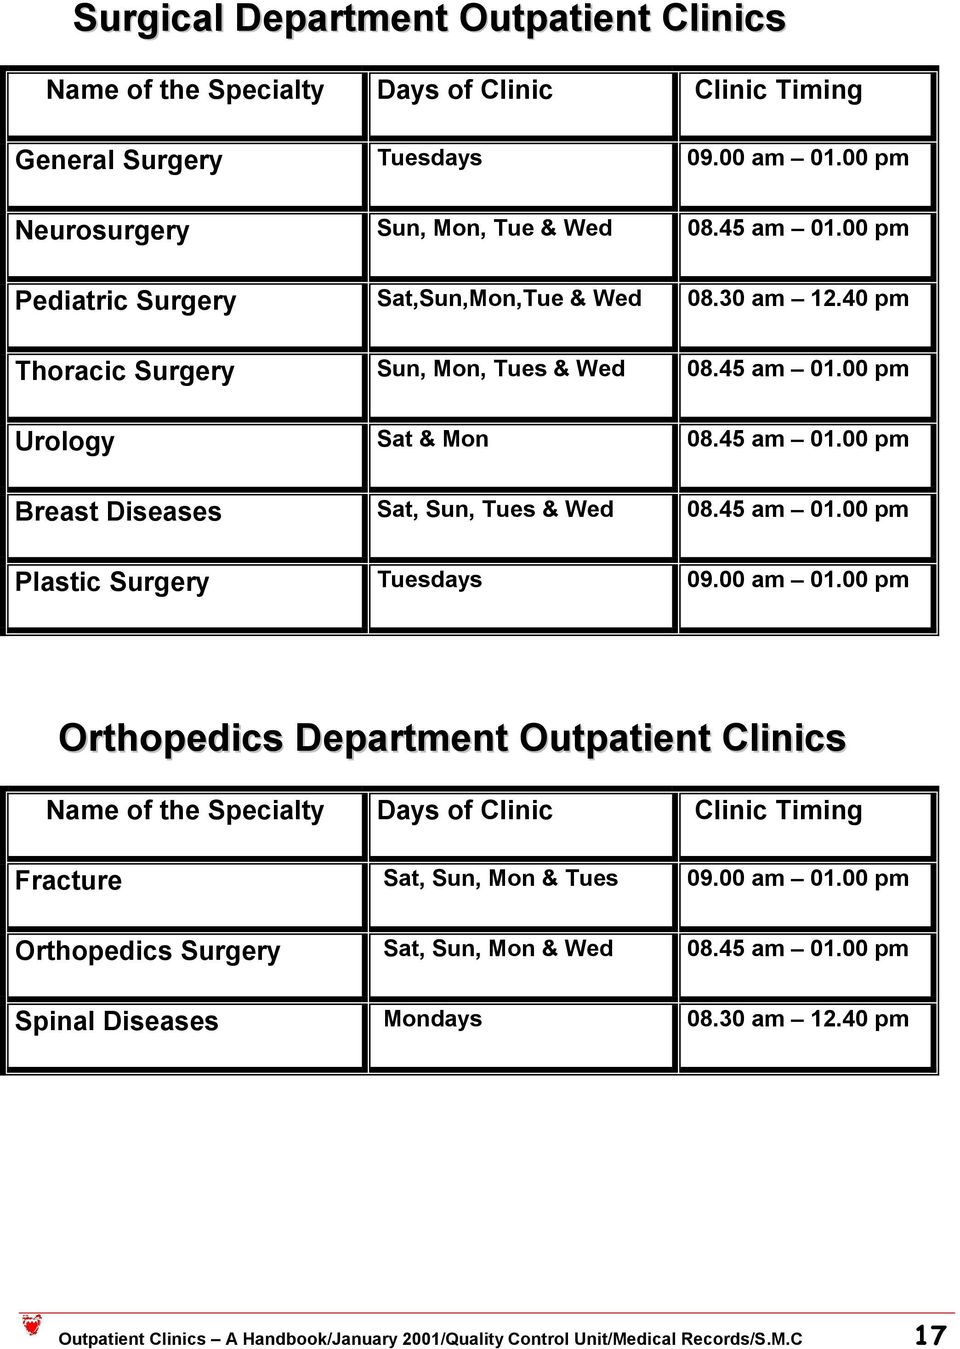 45 am 01.00 pm Plastic Surgery Tuesdays 09.00 am 01.00 pm Orthopedics Department Outpatient Clinics Name of the Specialty Days of Clinic Clinic Timing Fracture Sat, Sun, Mon & Tues 09.